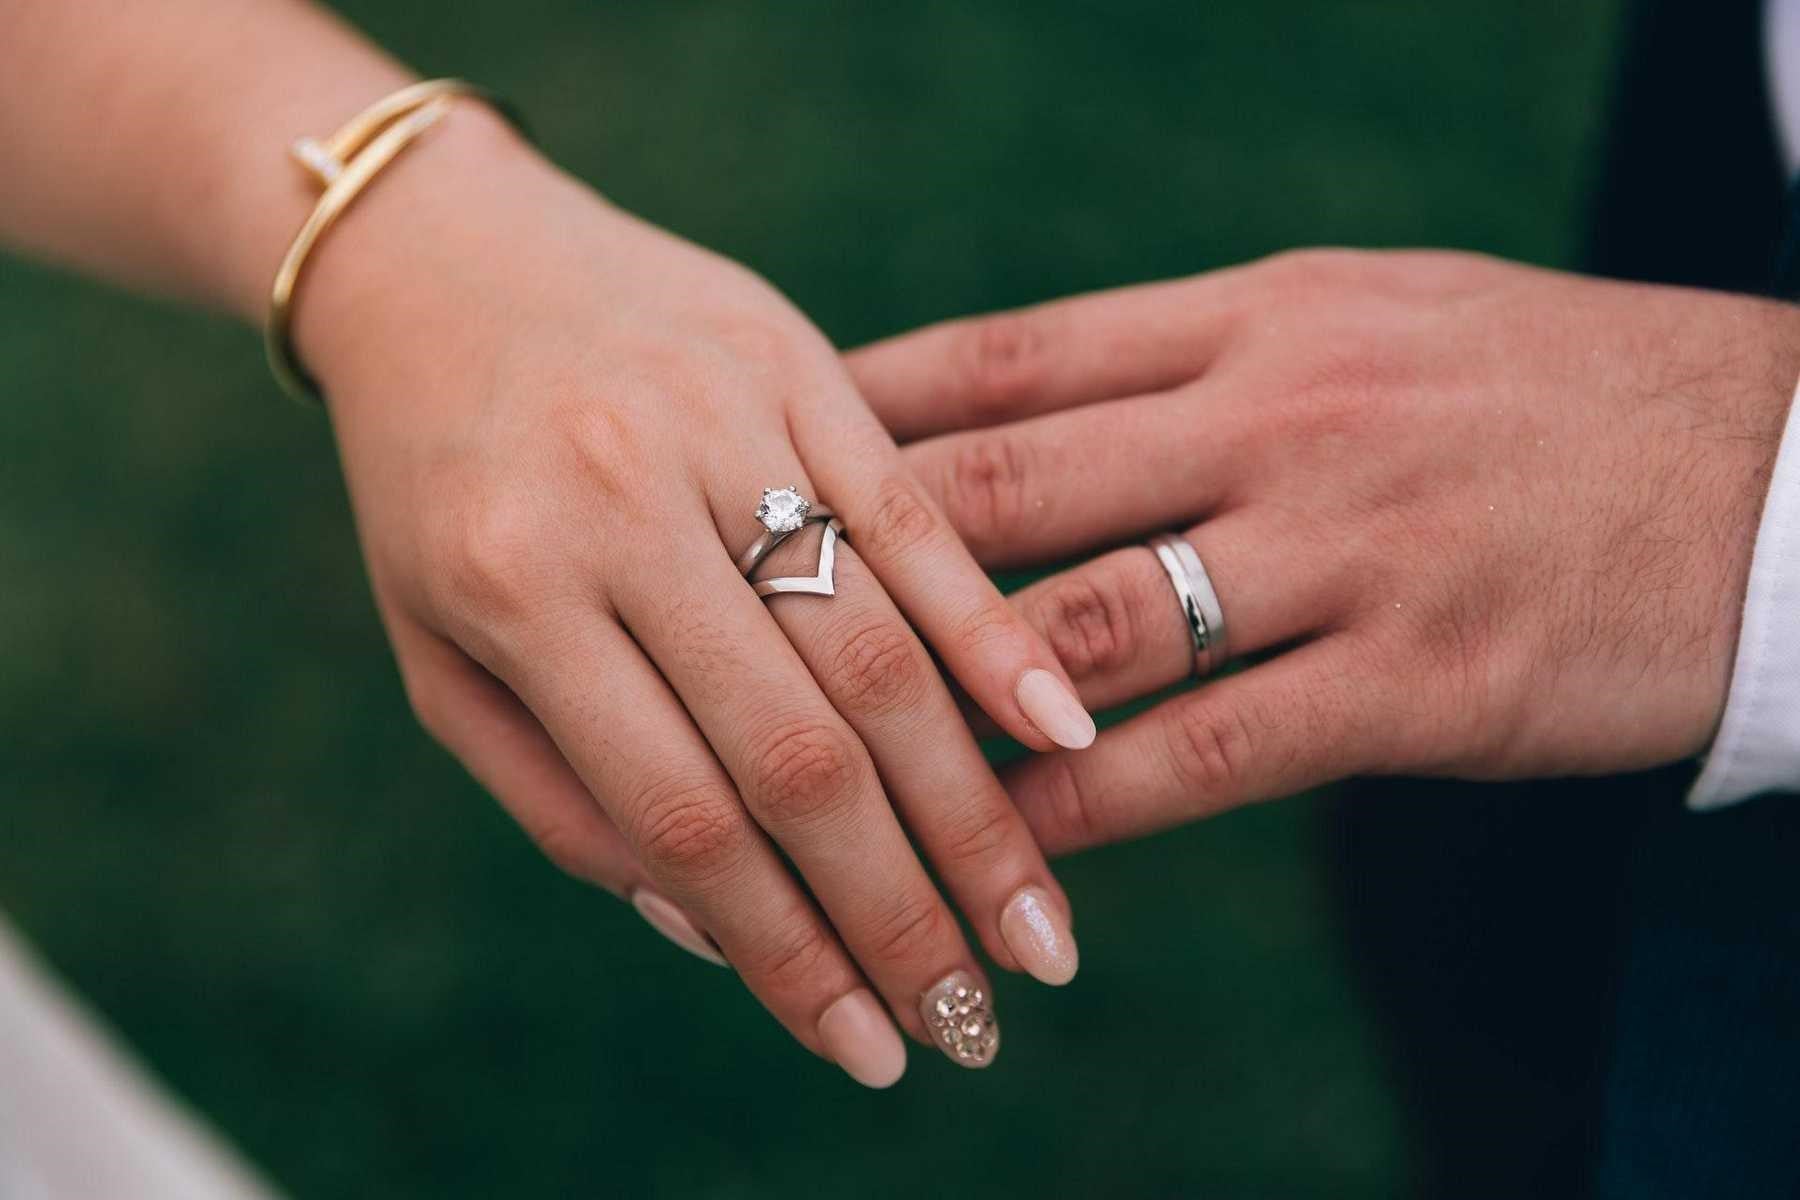 How To Clean Your Diamond Engagement Ring Like a Pro